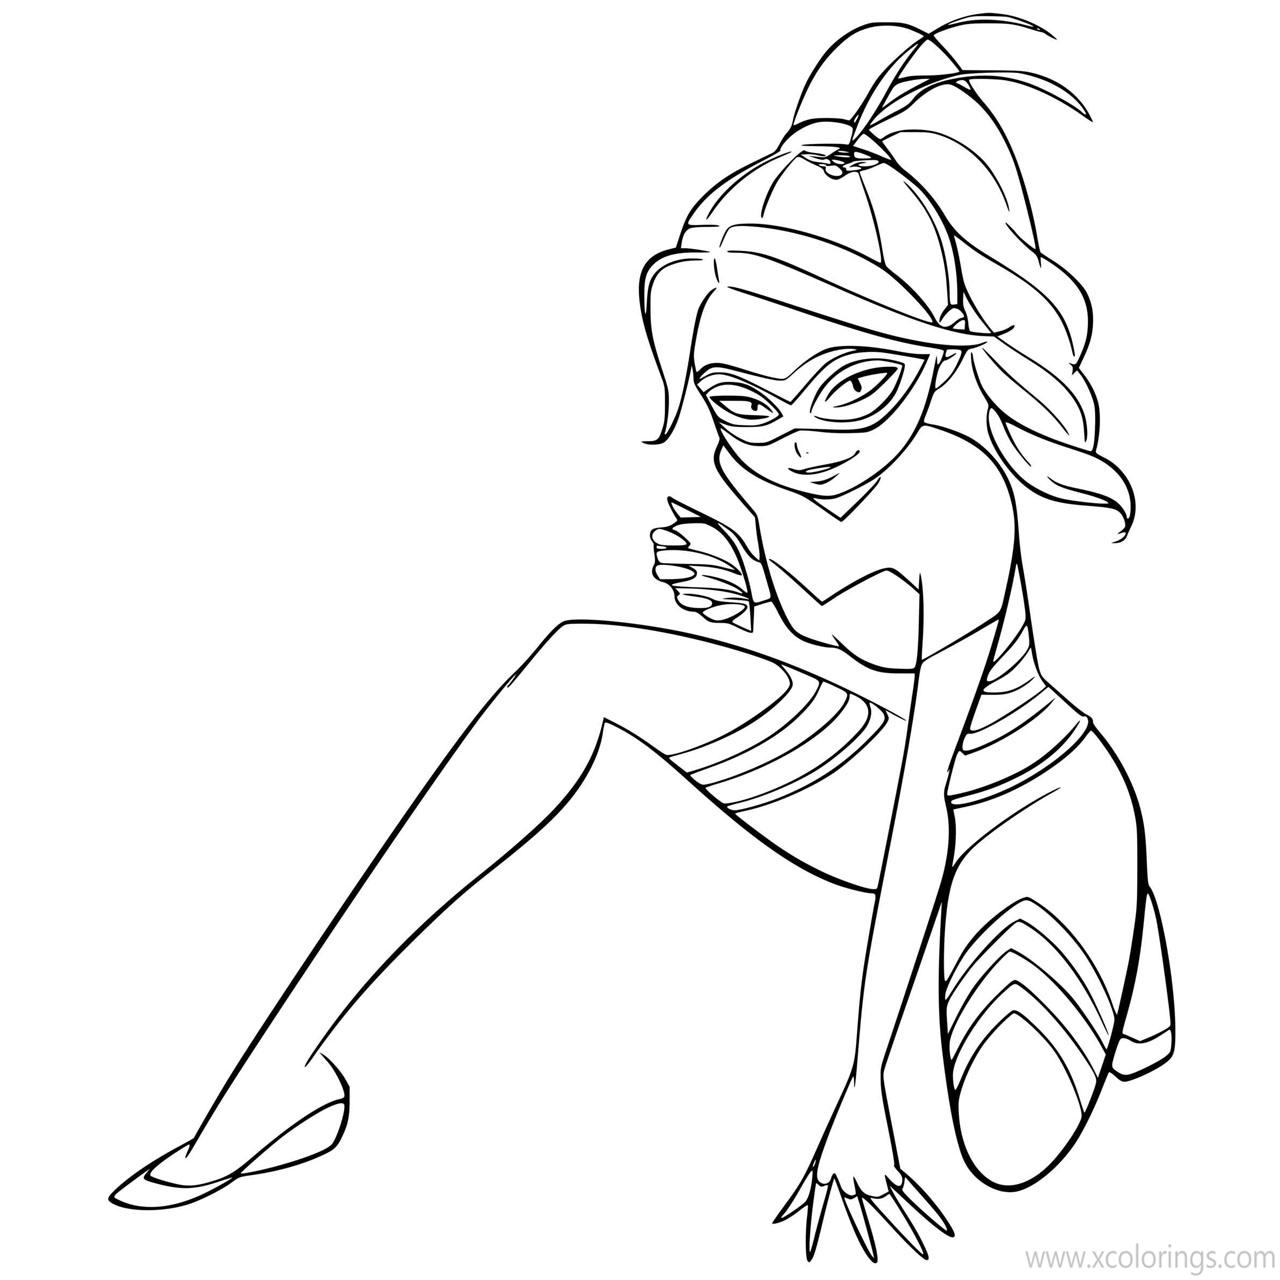 Free Miraculous Ladybug Coloring Pages Queen Bee printable